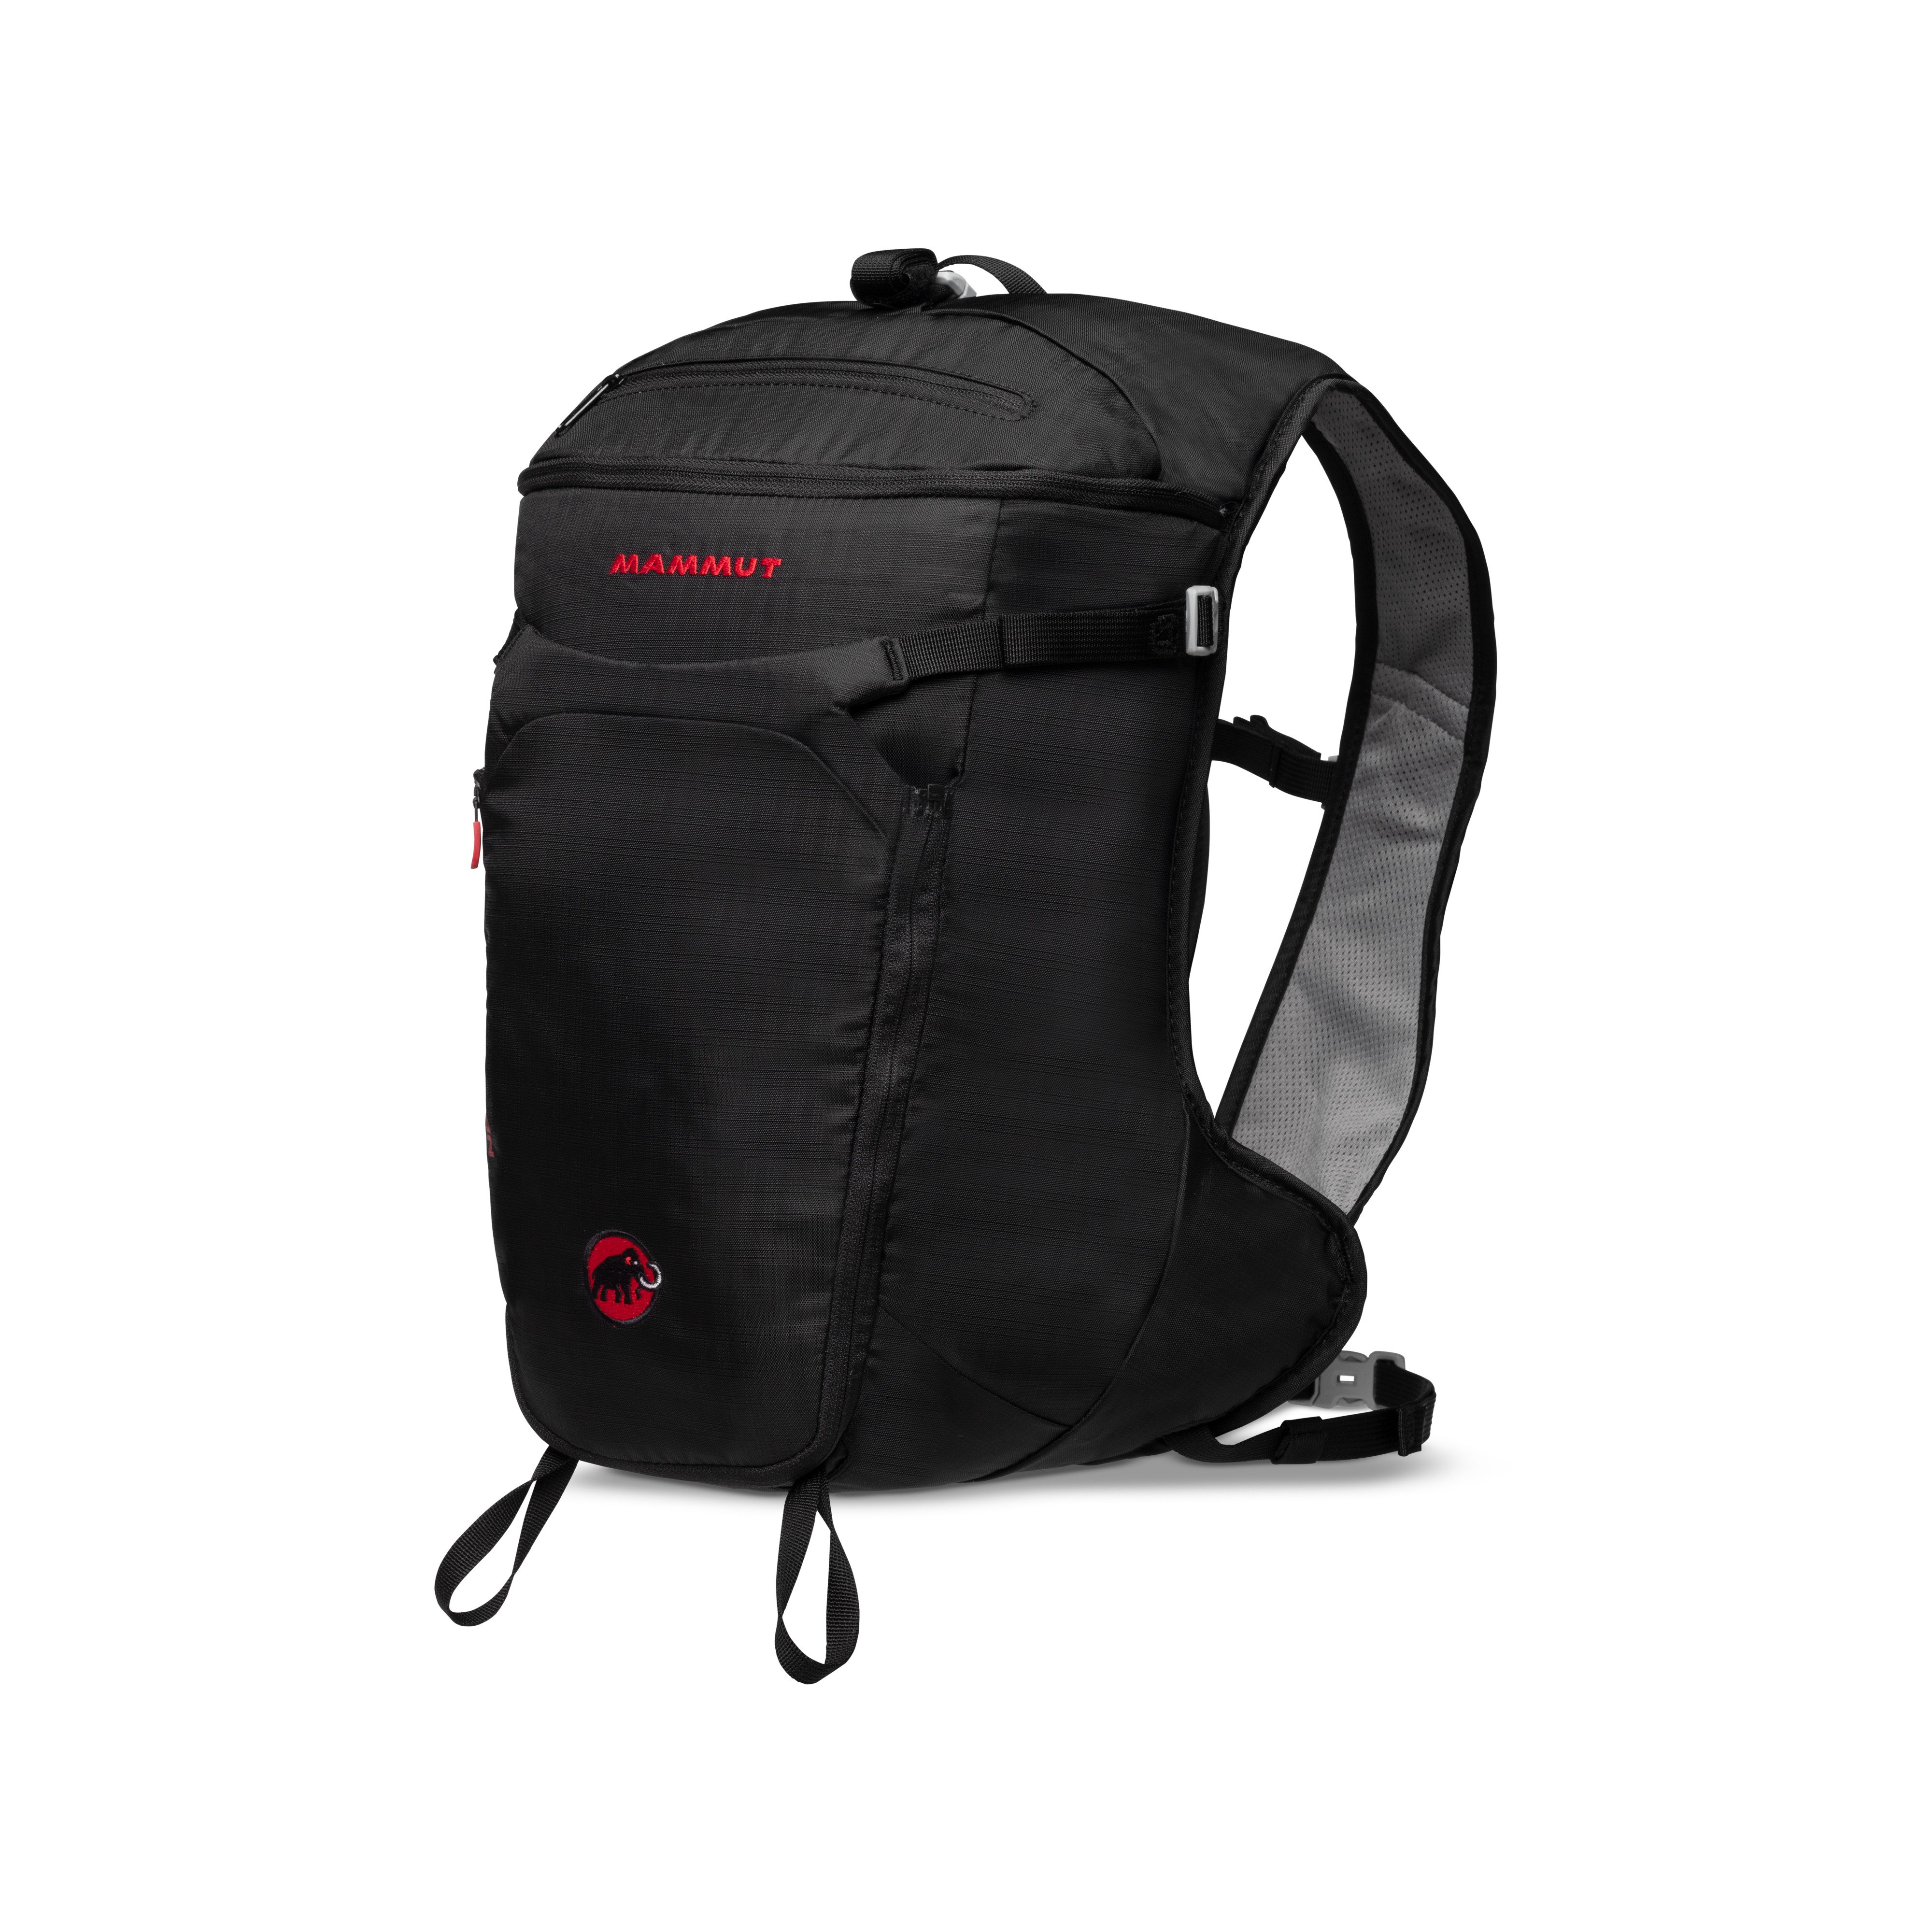 Neon Speed - black, 15 L product image